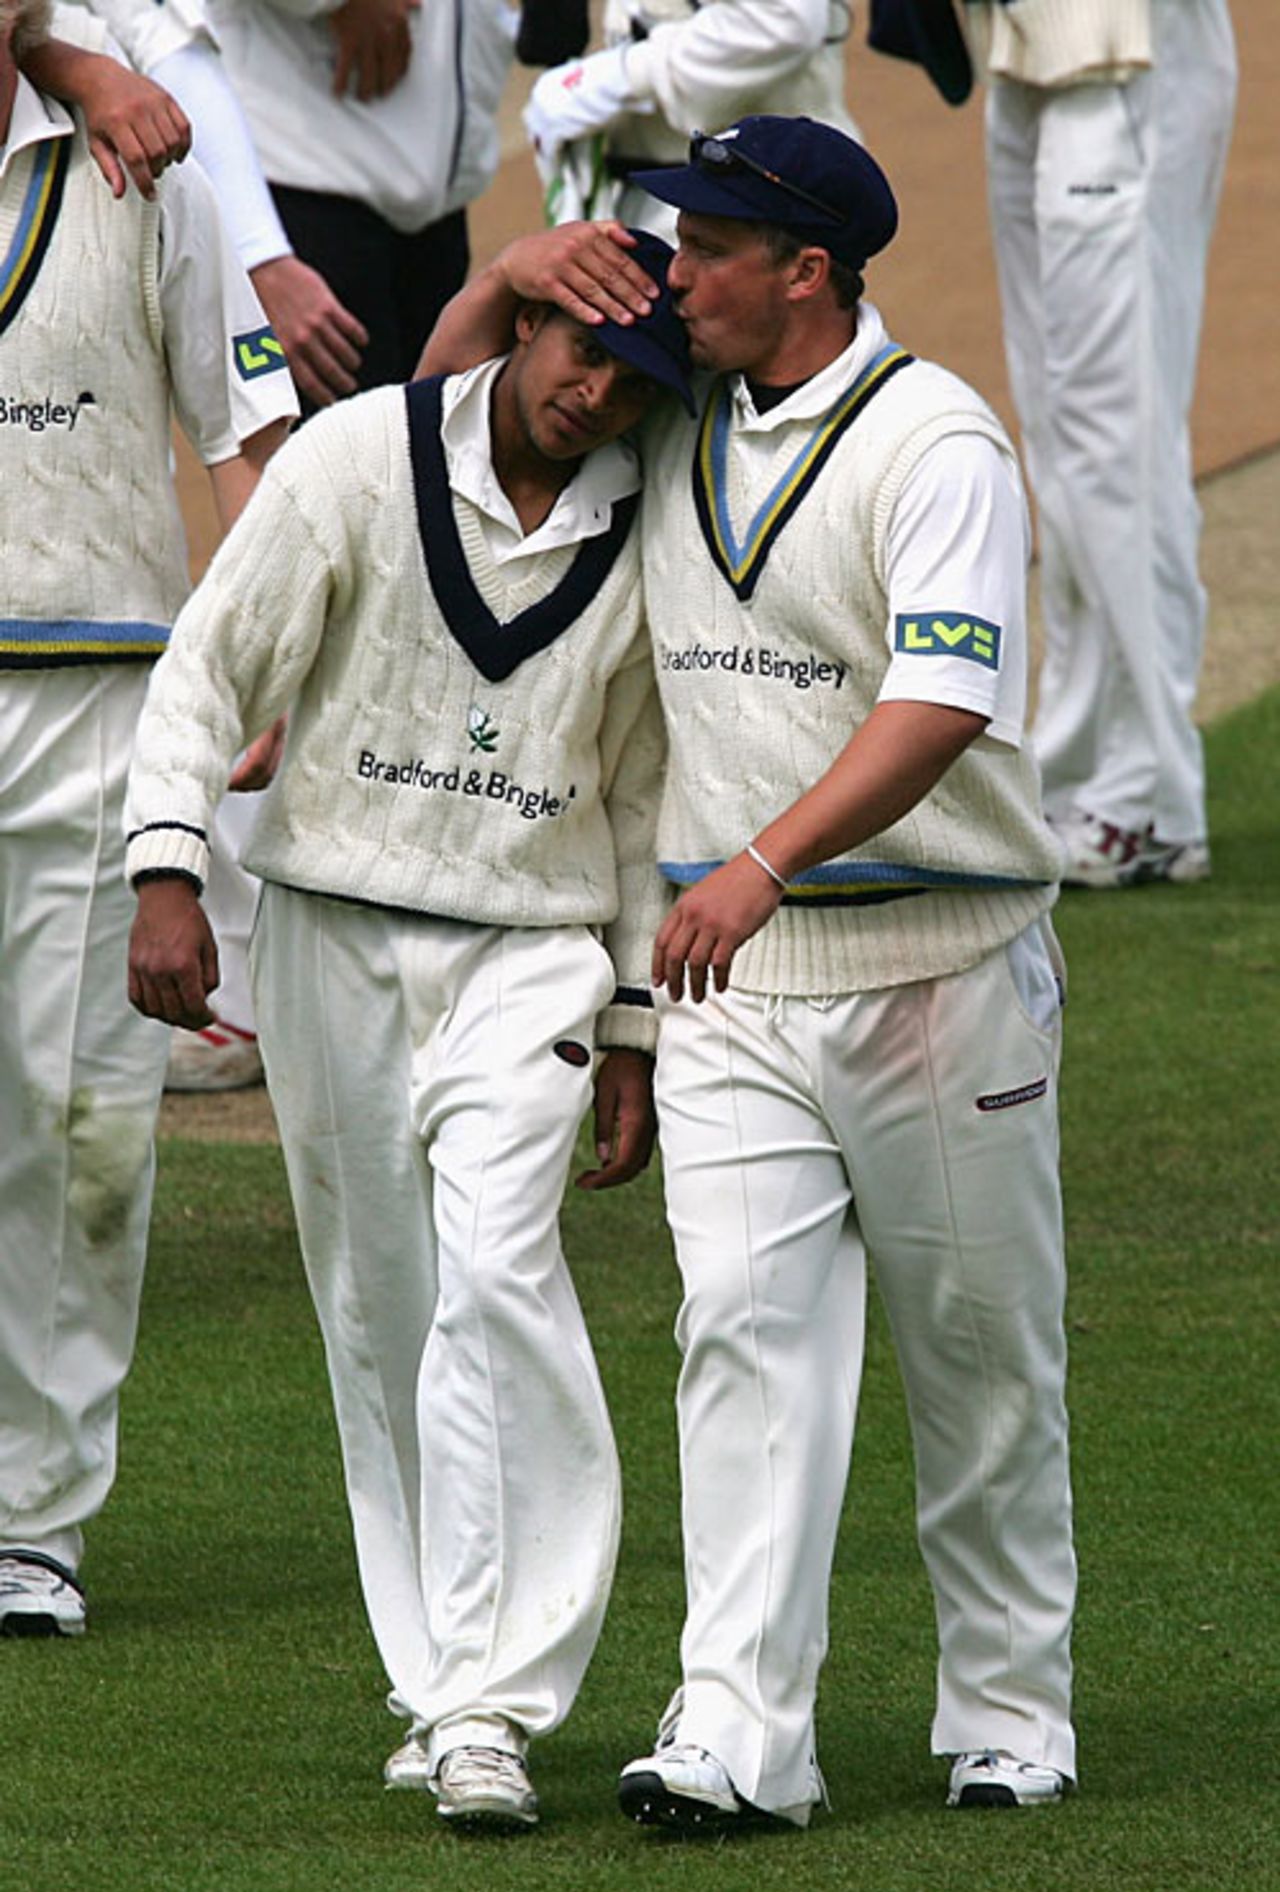 Adil Rashid receives a peck from his captain, Darren Gough, Yorkshire v Worcestershire, Headingley, May 12, 2007